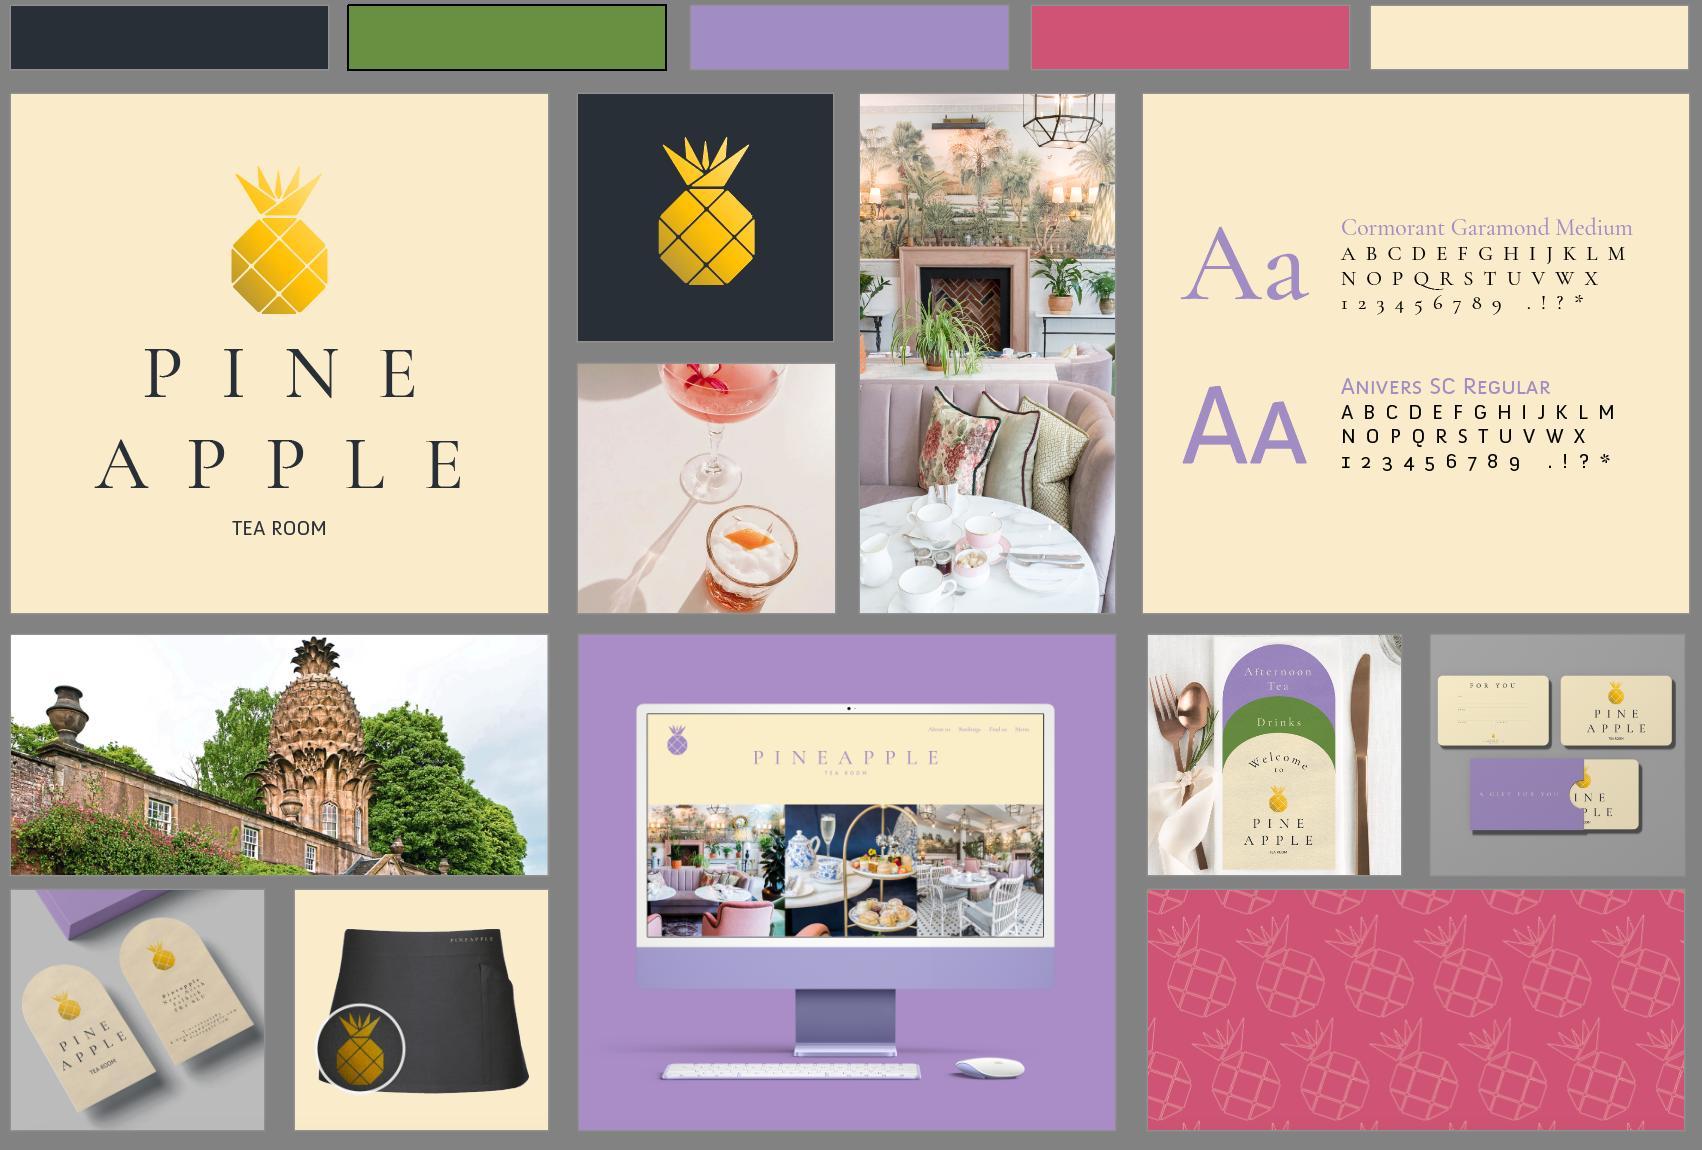 Brand identity by Amelia Slade, Graphic communications. Showing an identity for a pineapple themed tearoom.